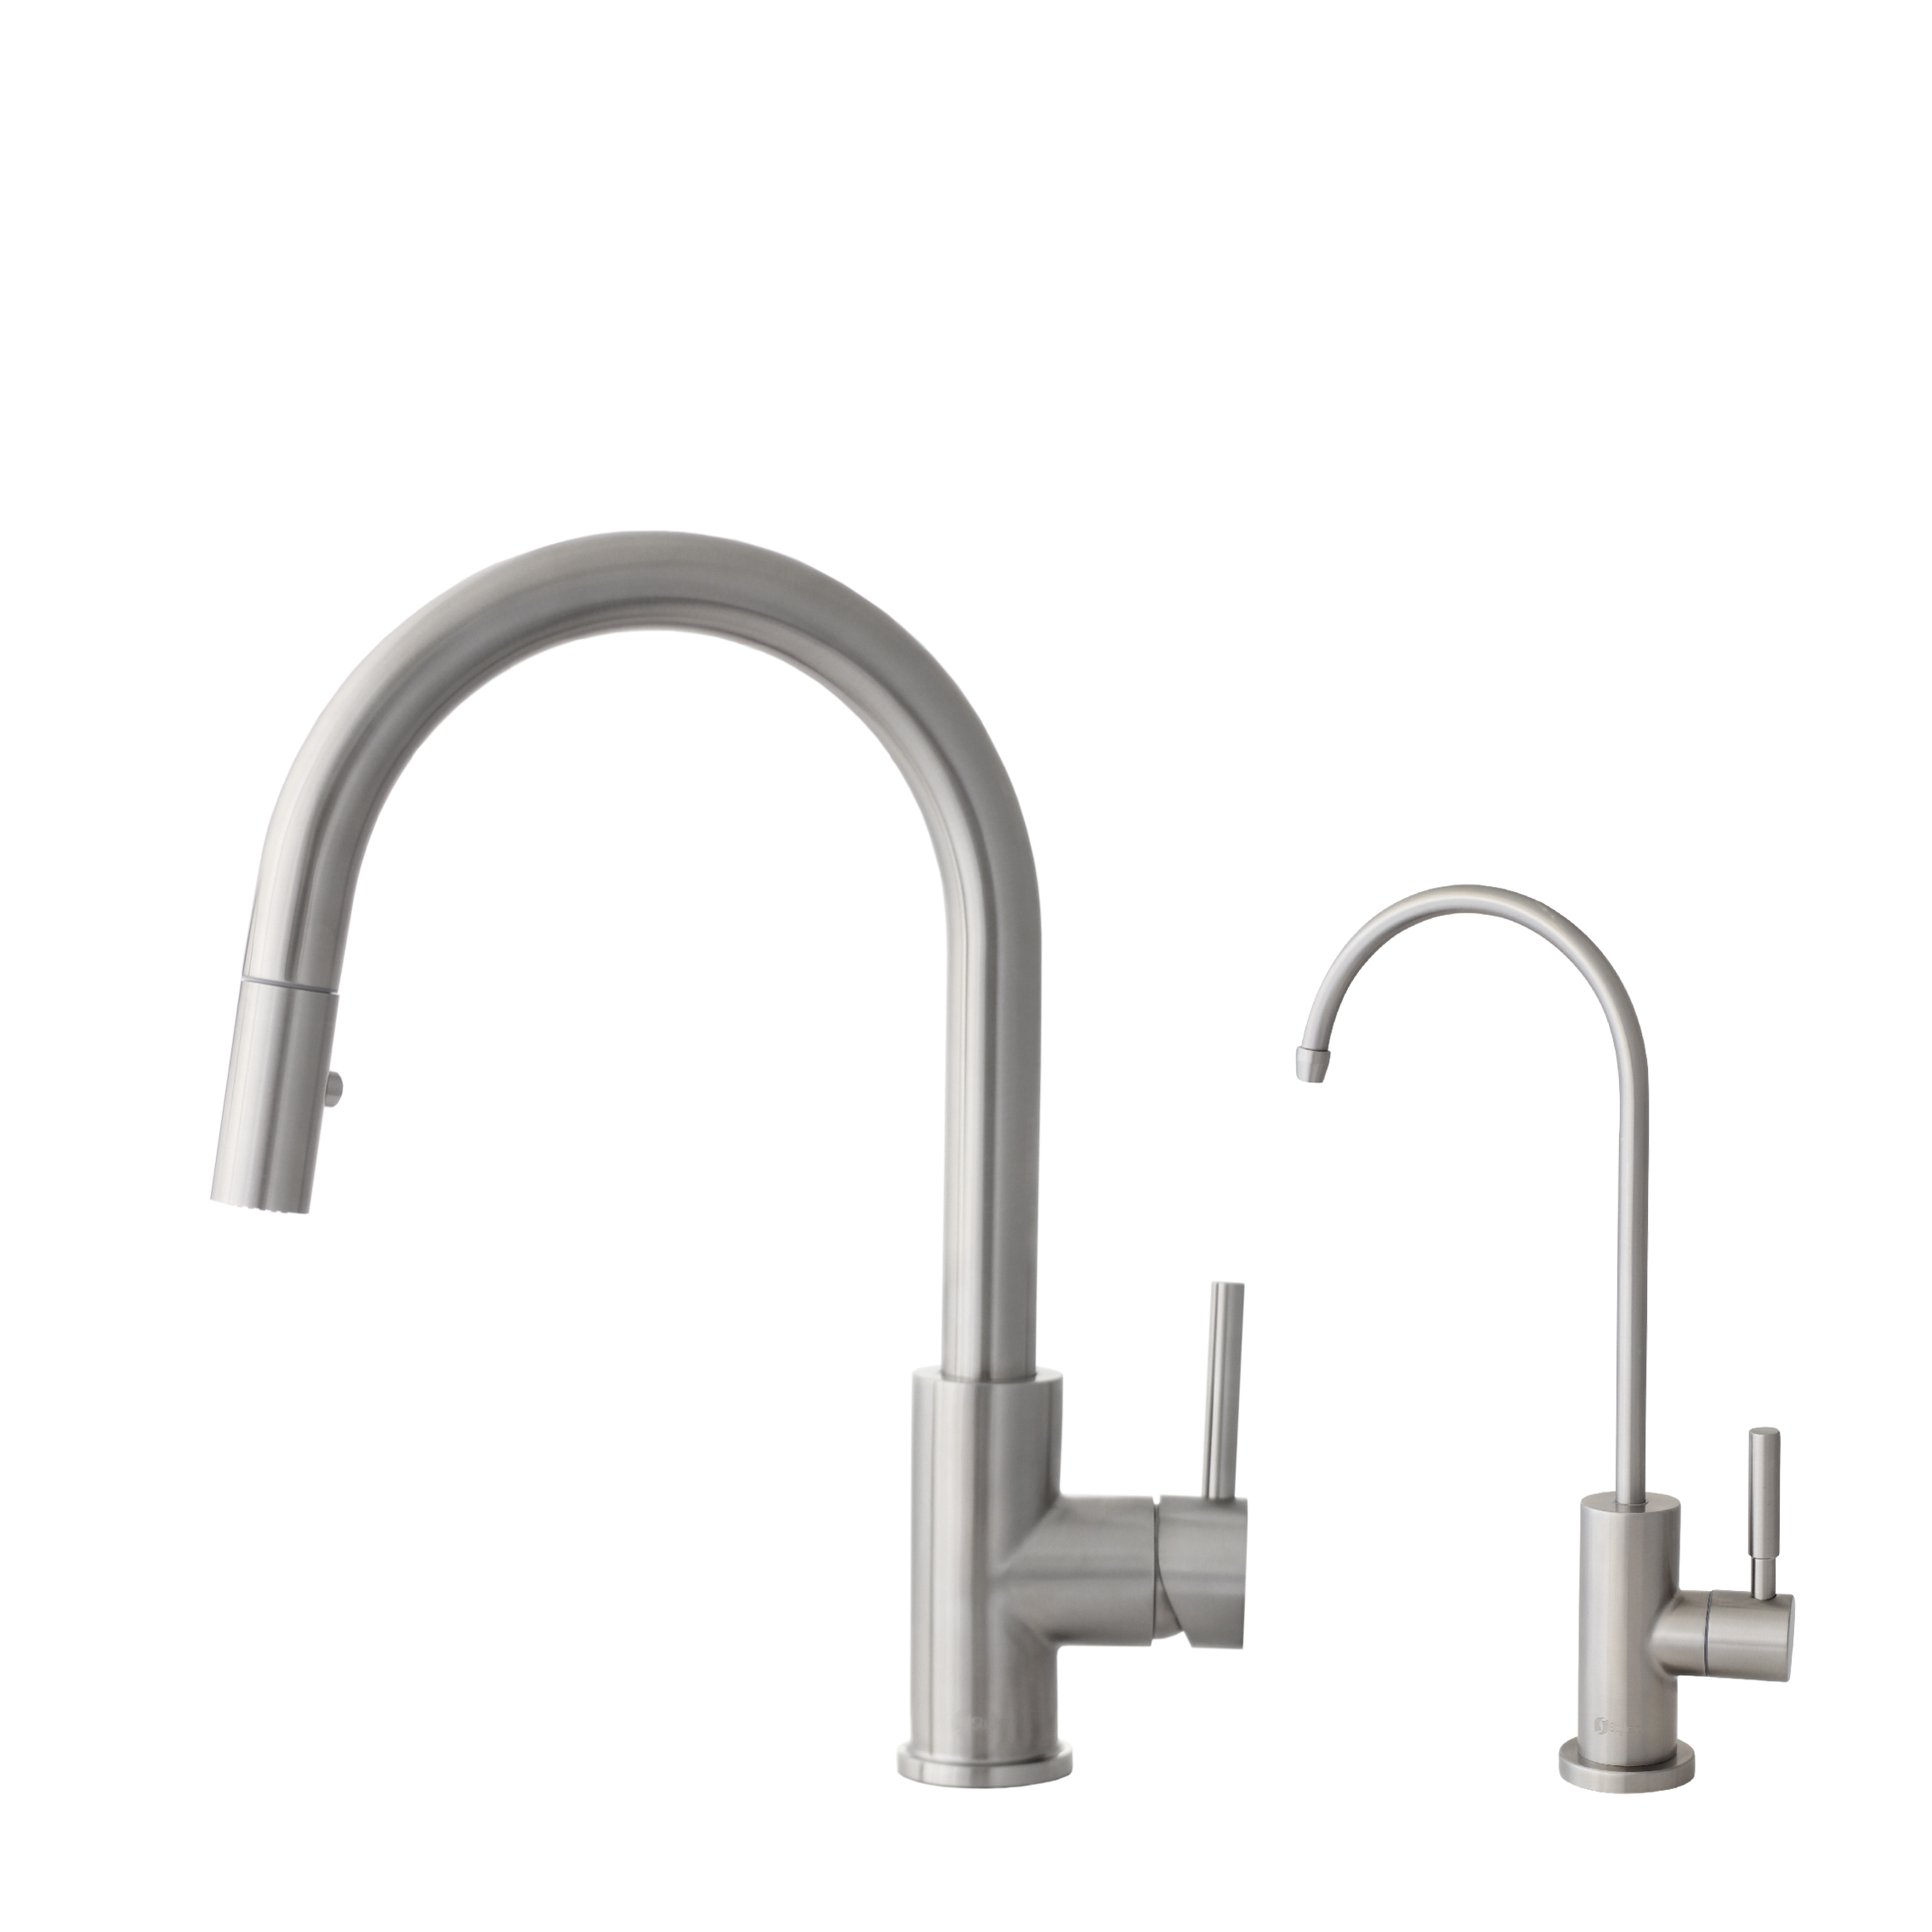 STYLISH K131K142 14 1/8 INCH STAINLESS STEEL PULL DOWN KITCHEN FAUCET WITH WATER TAP